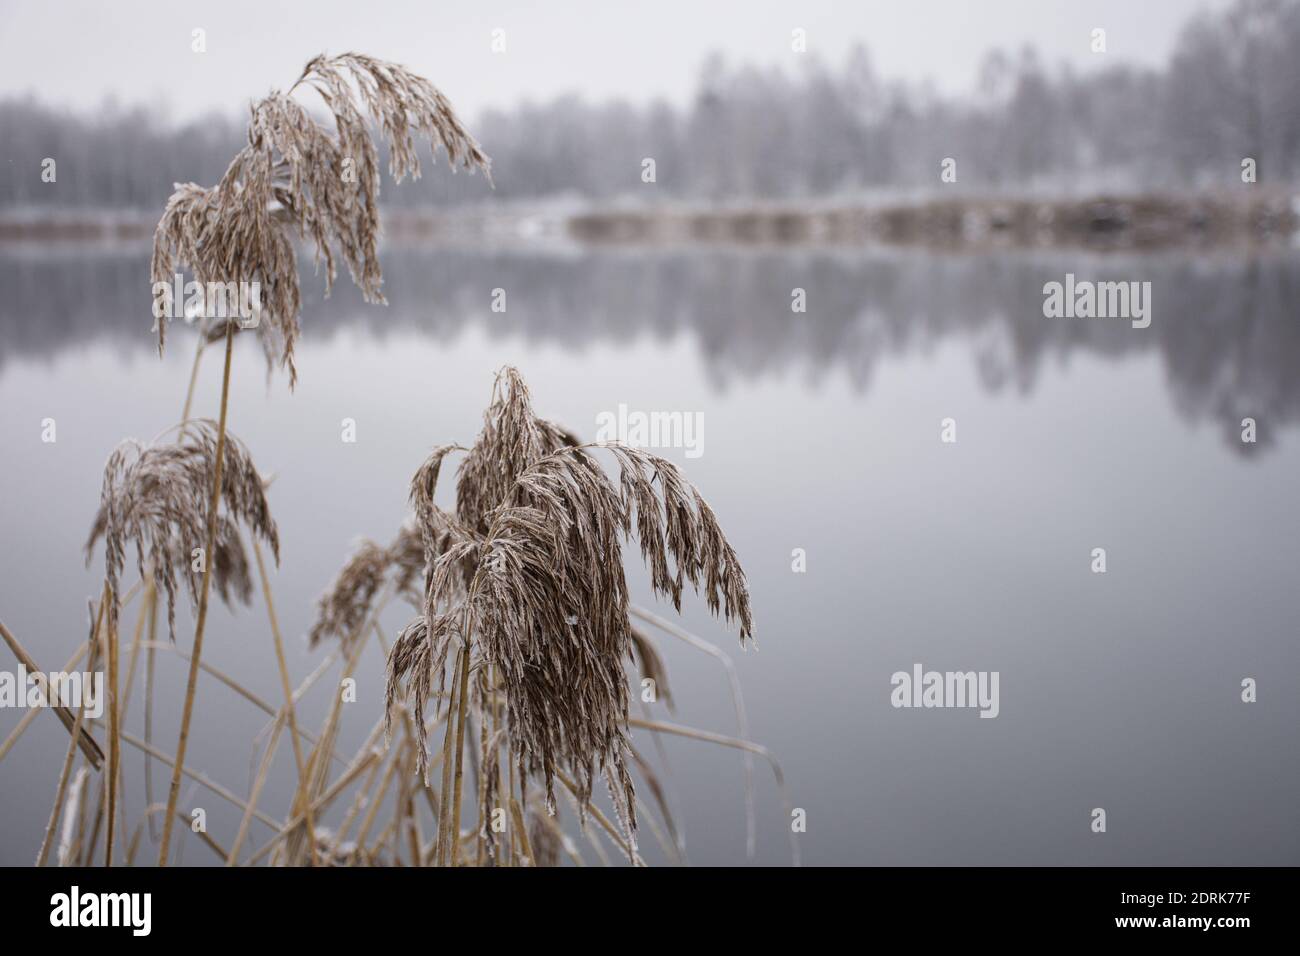 dry grass reeds in the snow as a natural background Stock Photo